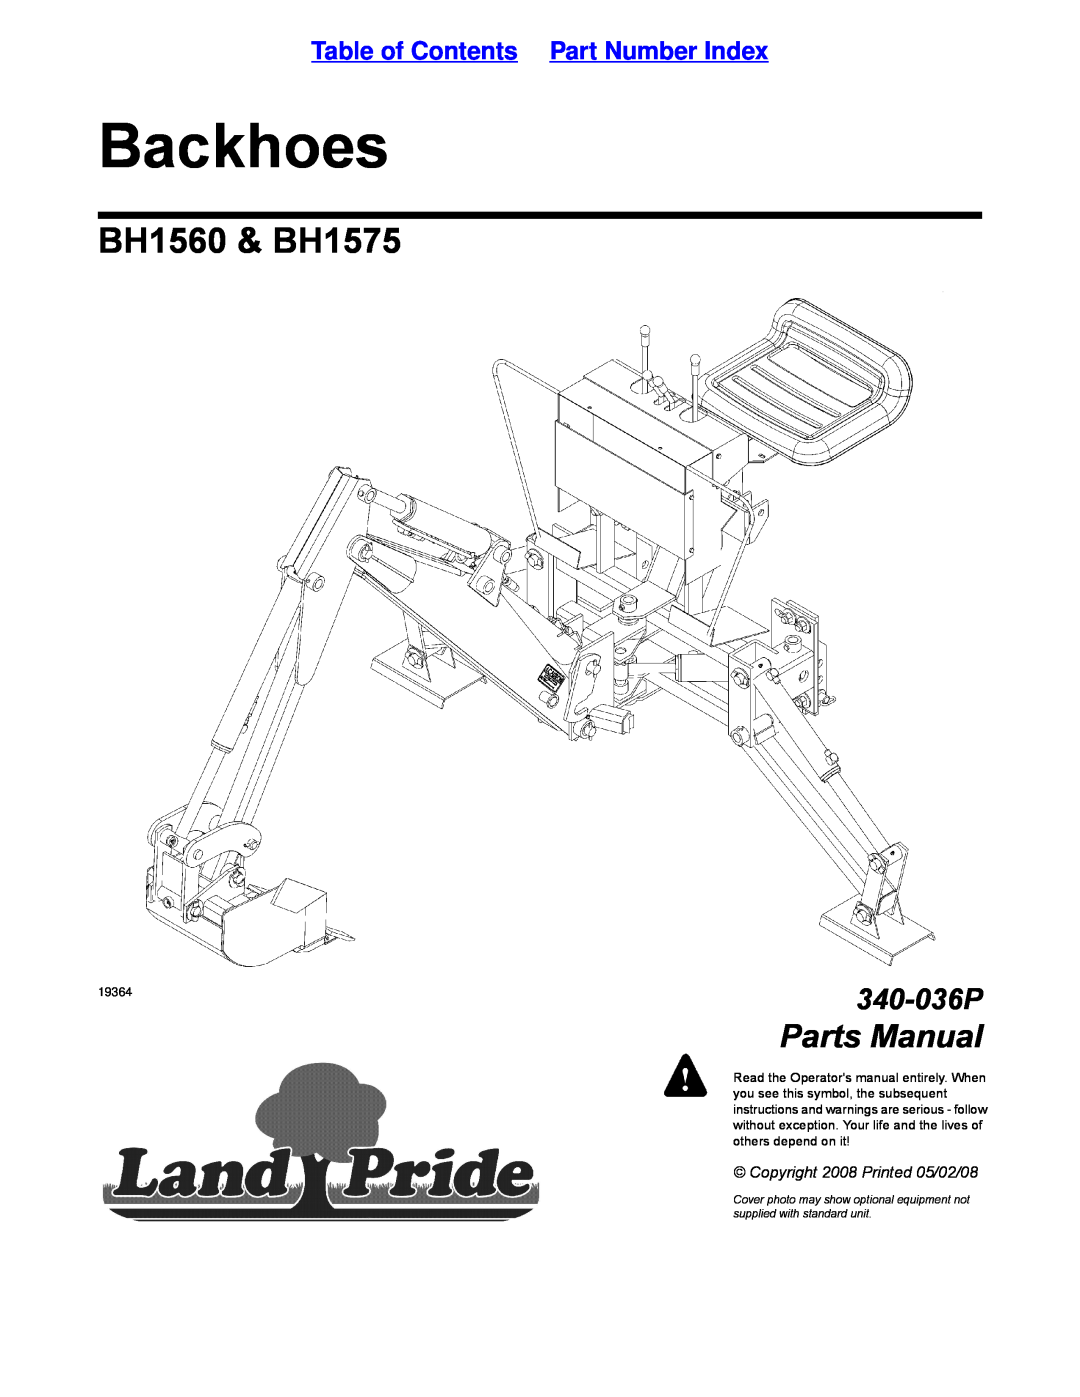 Land Pride manual Table of Contents Part Number Index, Backhoes, BH1560 & BH1575, Parts Manual, 340-036P 